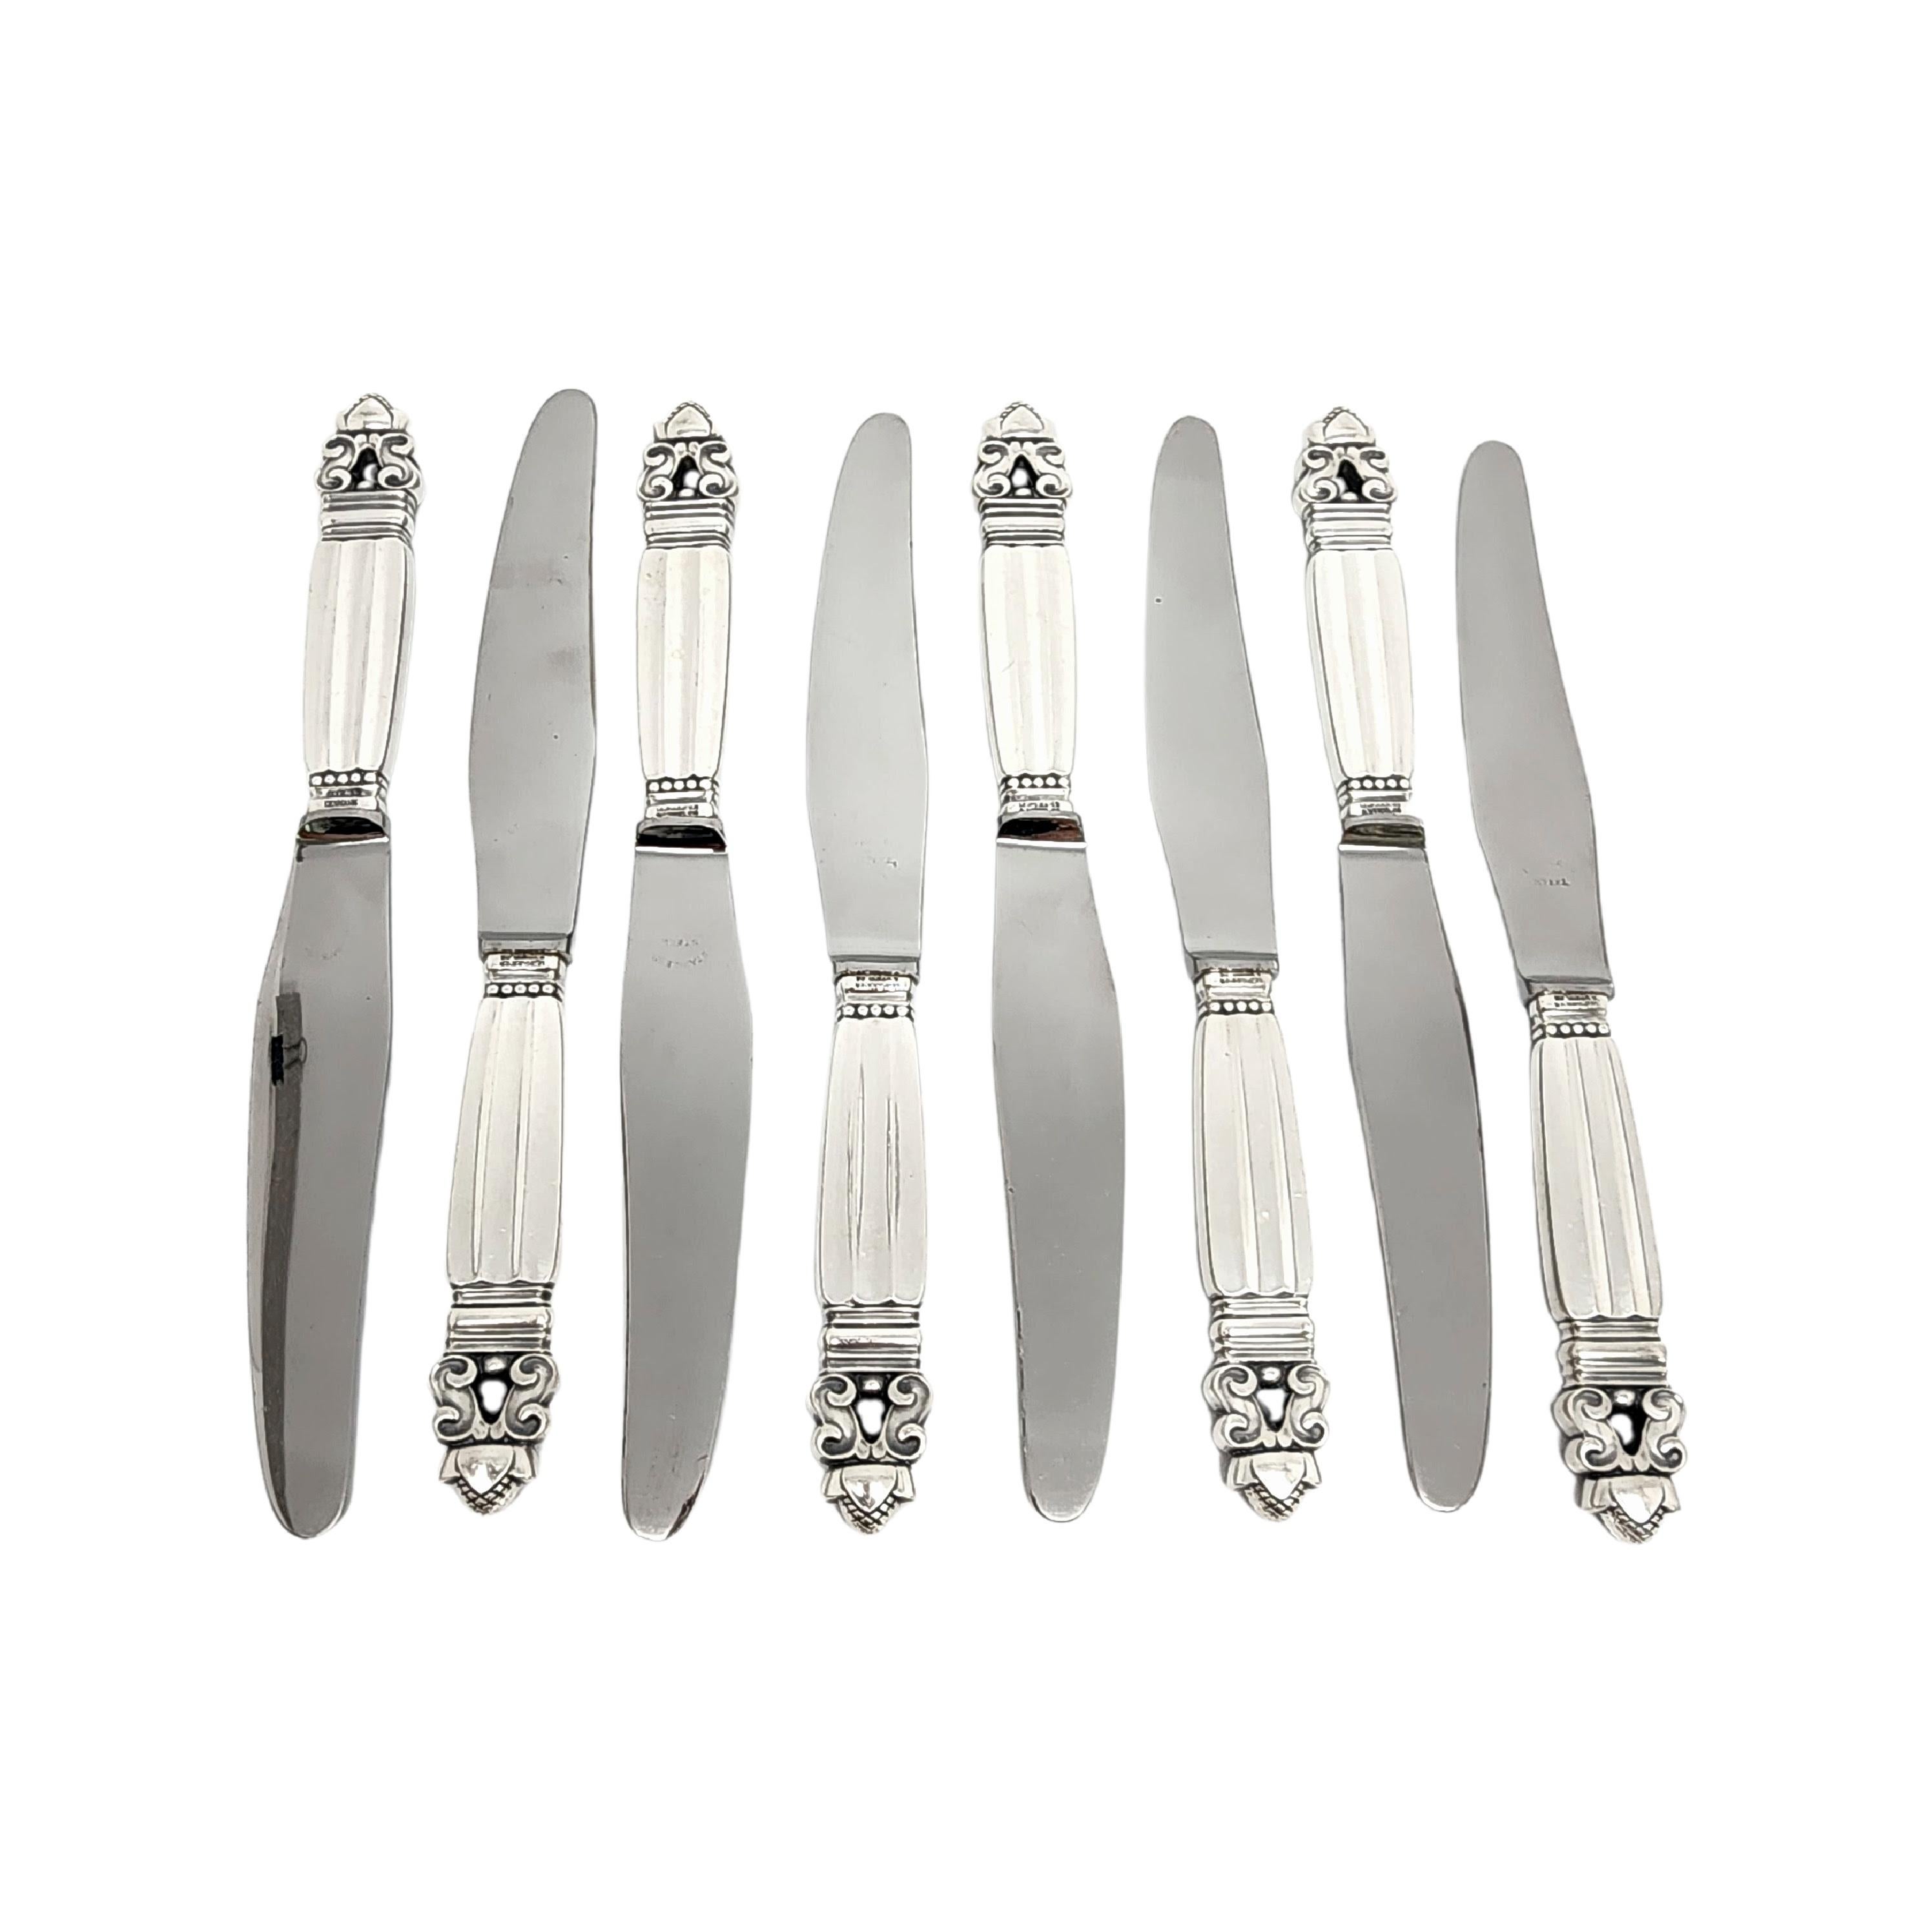 Set of 8 sterling silver handle stainless blade knives in the Acorn pattern by Georg Jensen.

The Acorn pattern was introduced in 1915 as a collaboration between Georg Jensen and designer Johan Ronde. The Acorn pattern, which combines Art Nouveau